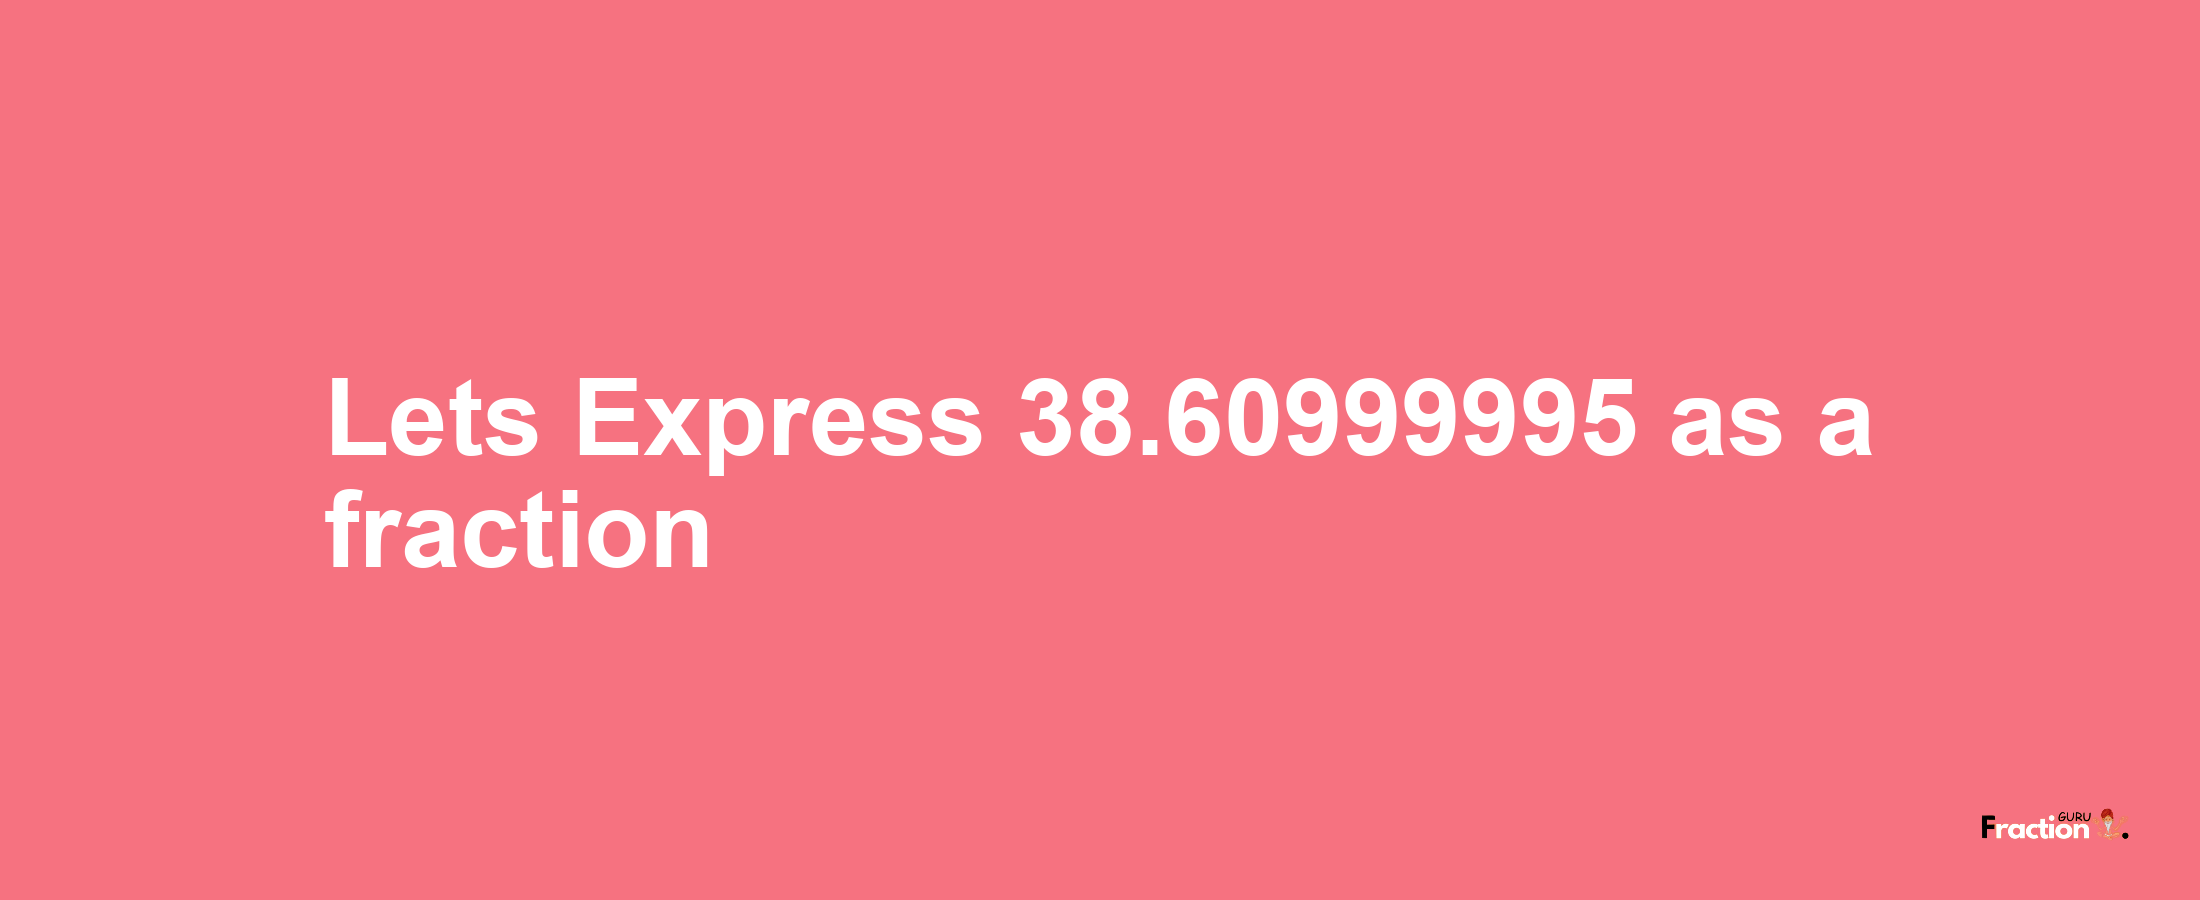 Lets Express 38.60999995 as afraction